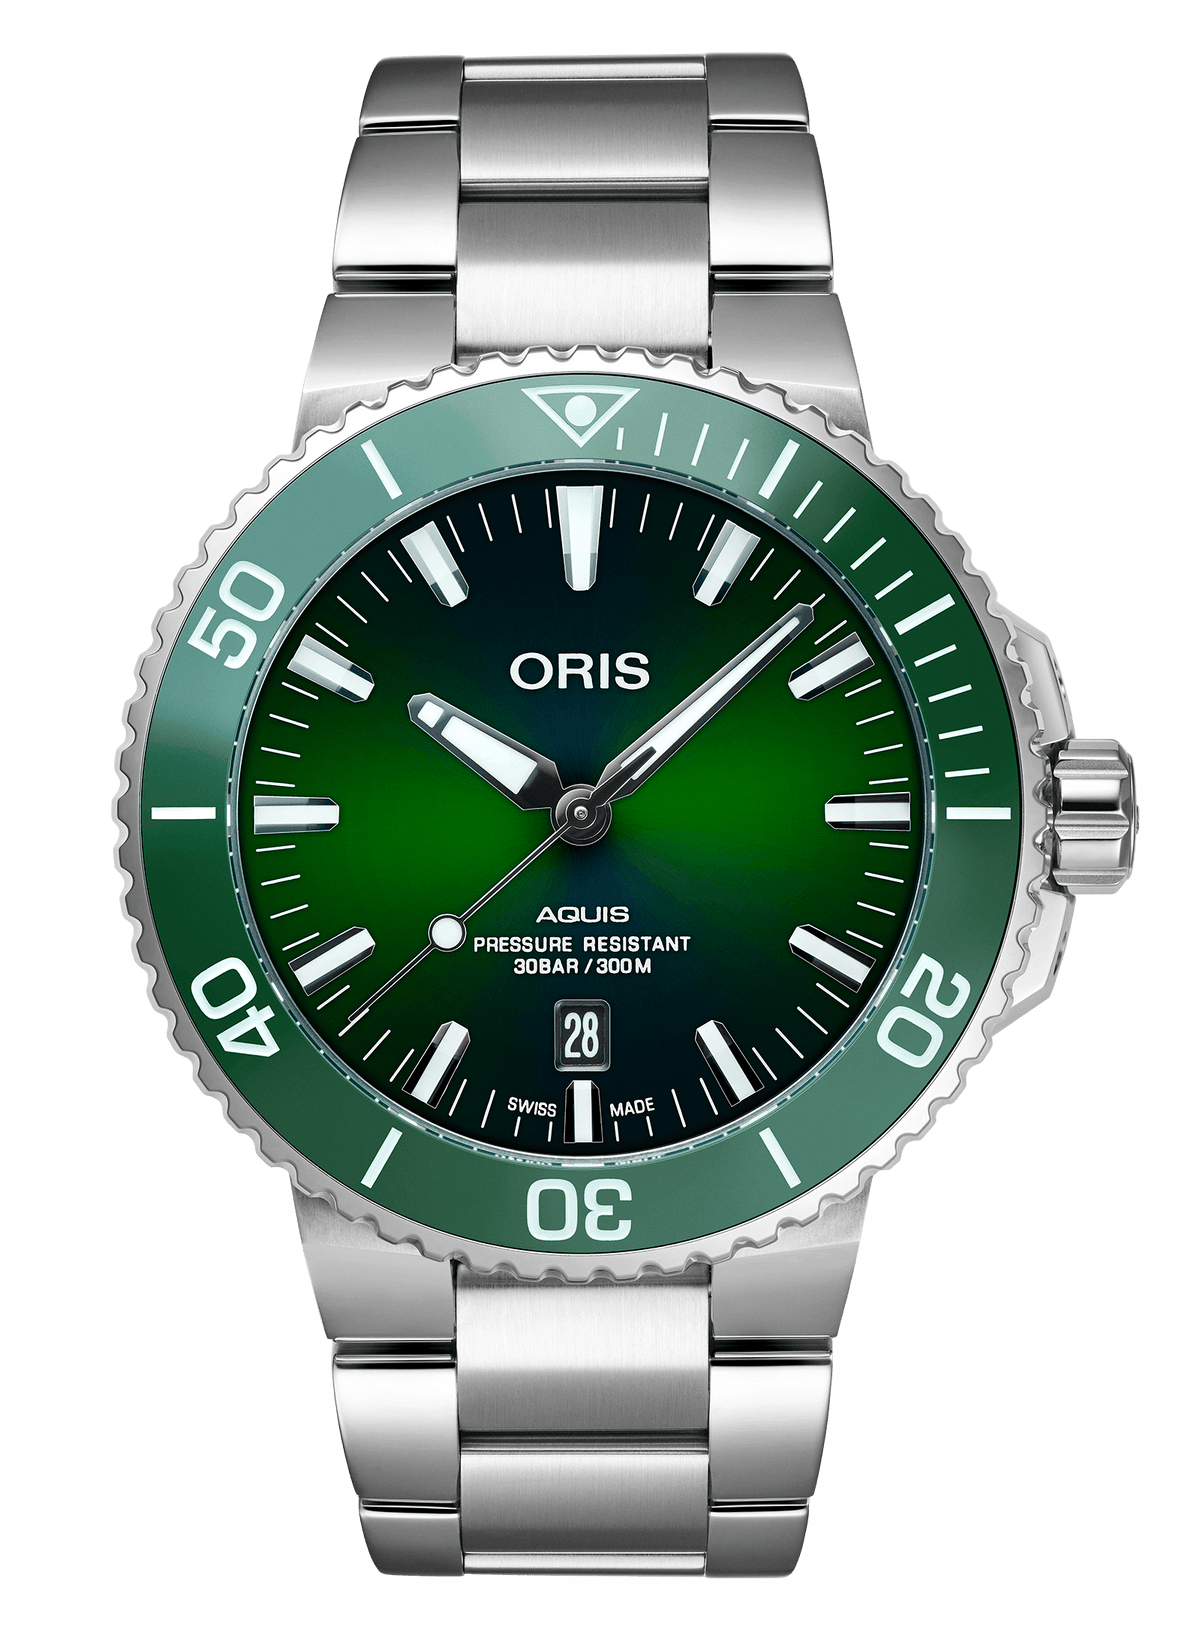 Oris Aquis Men's 43.5mm Stainless Steel Automatic Watch 733 7730 4157MB - Wallace Bishop